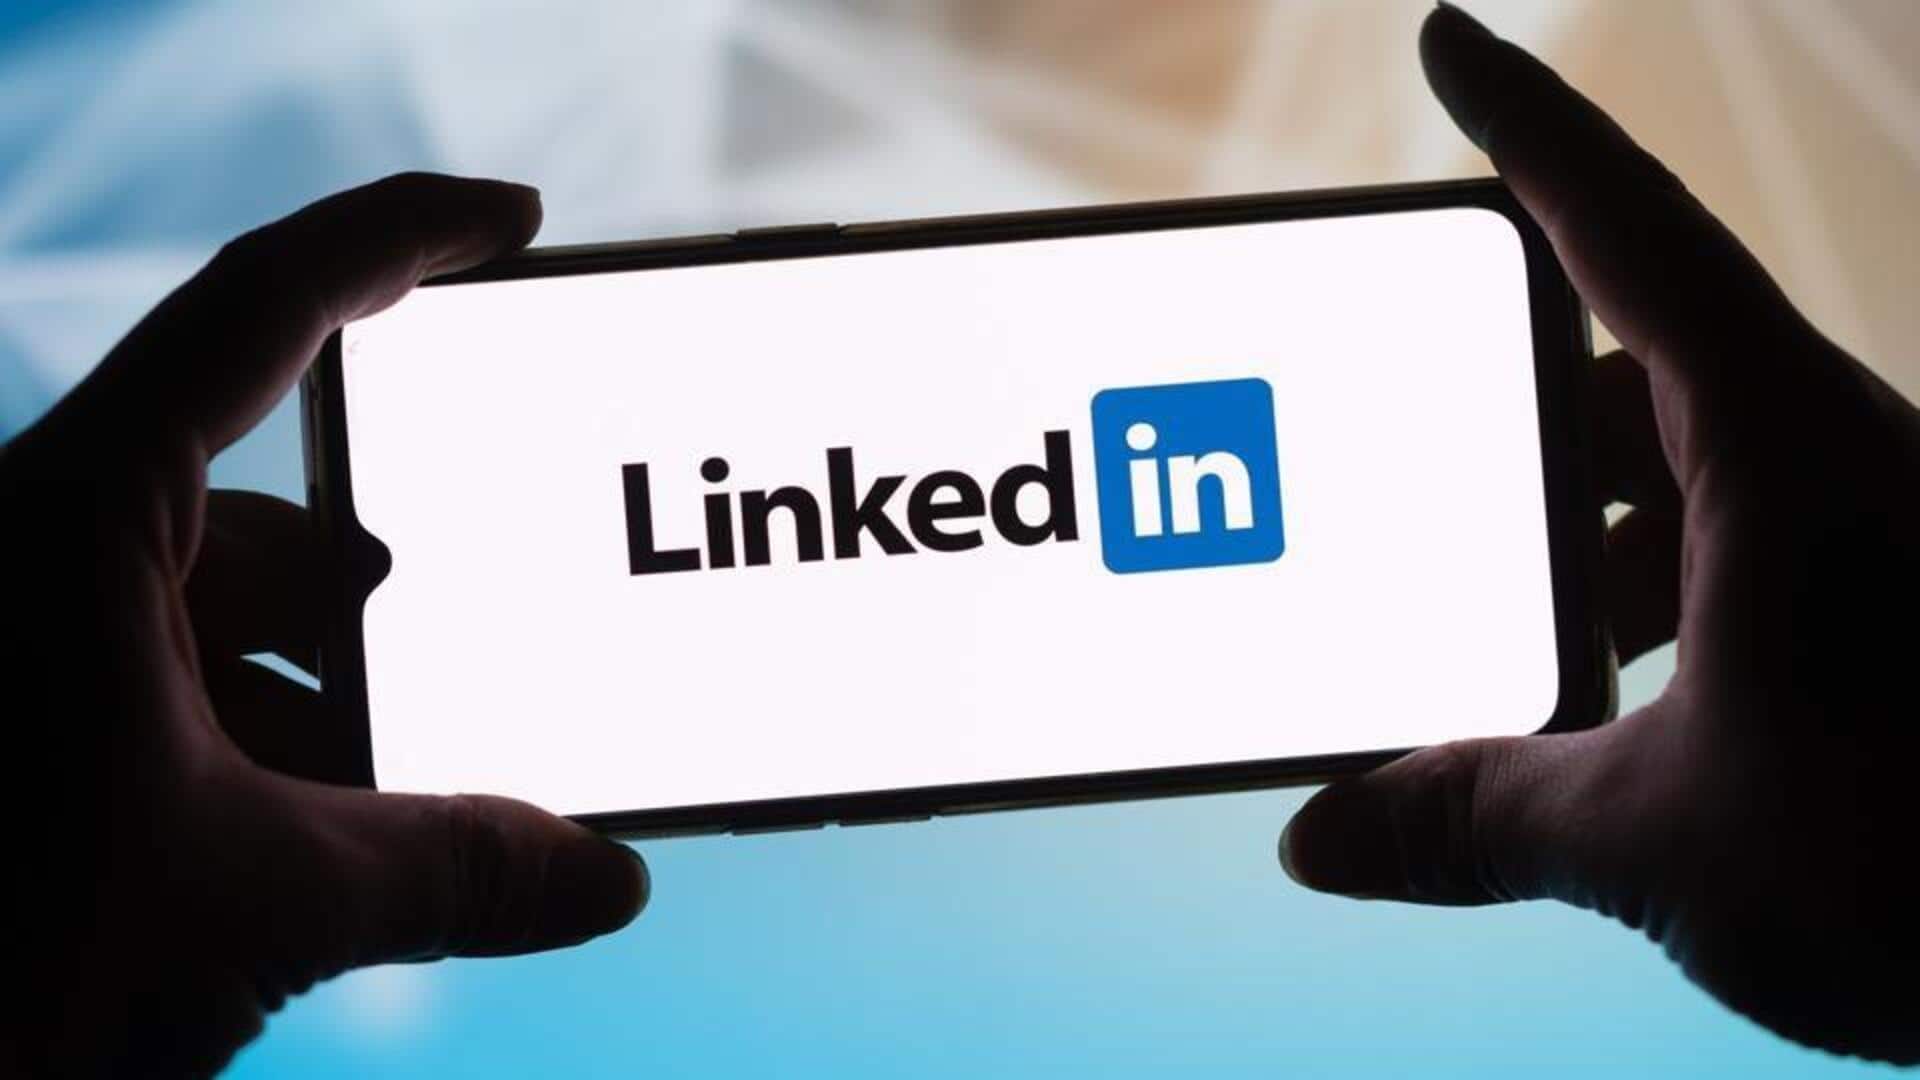 Want summaries of long-winded LinkedIn posts? Use this Chrome extension